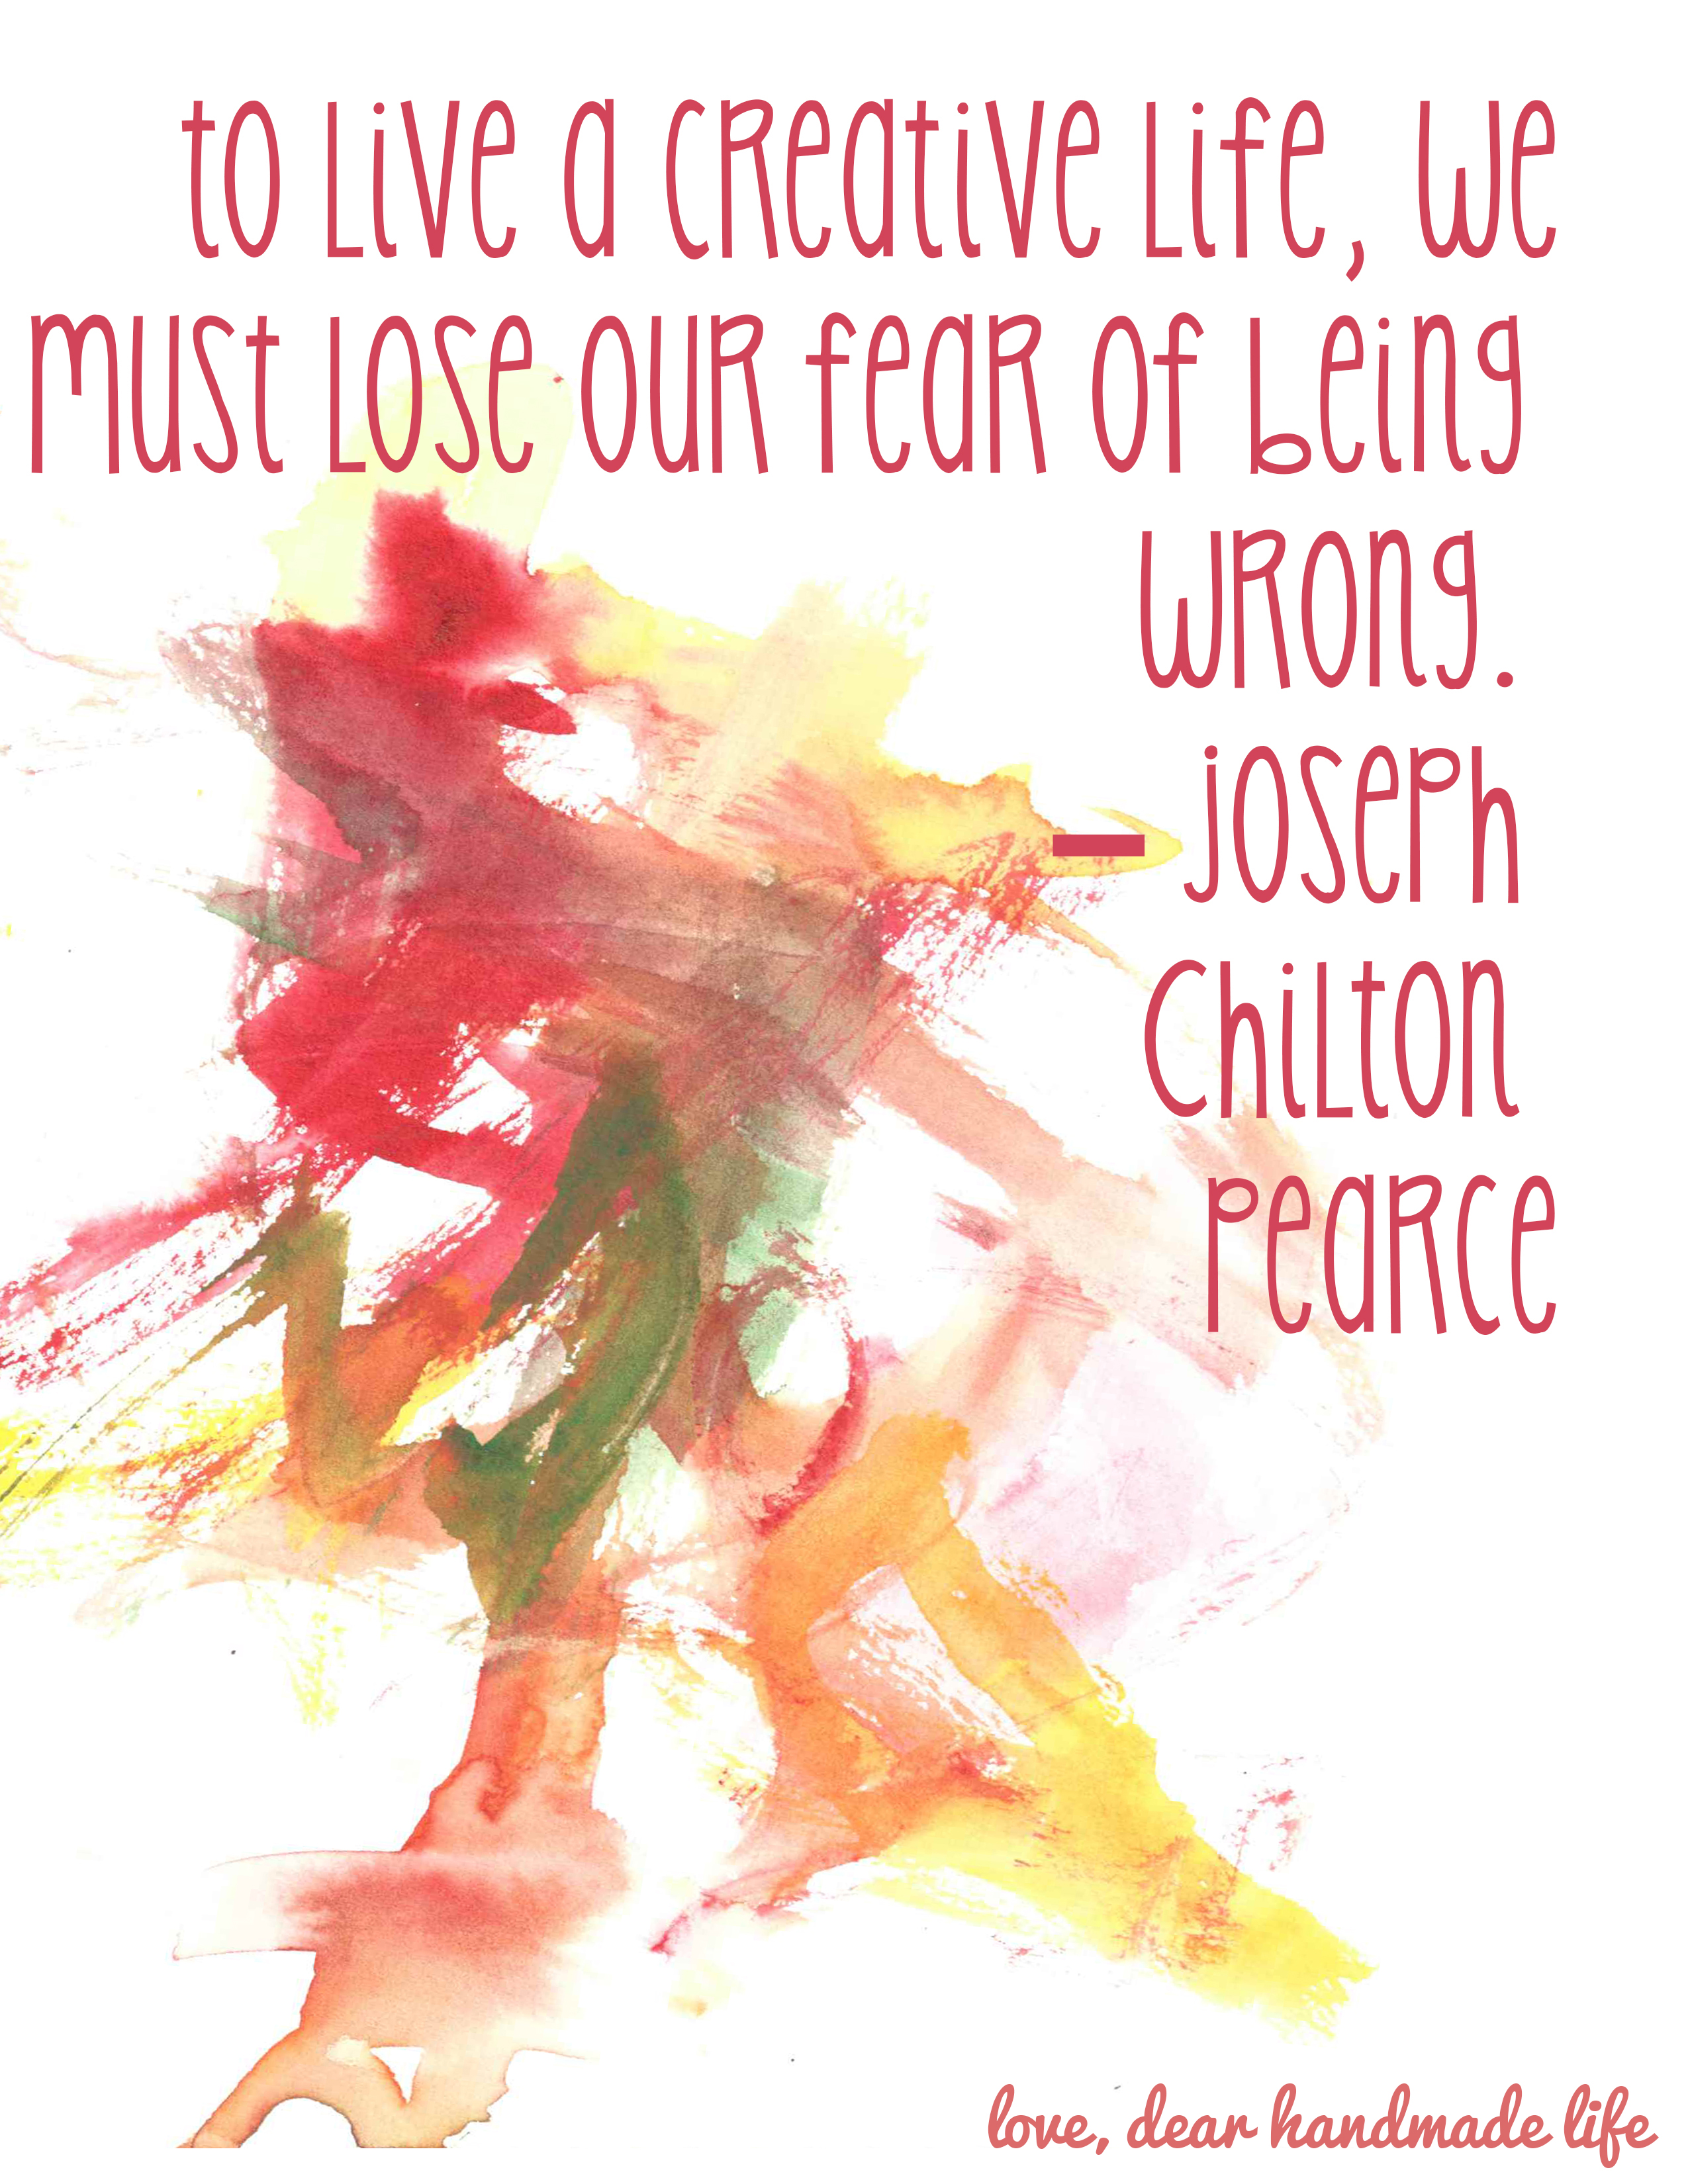 to-live-a-creative-life-we-must-lose-our-fear-of-being-wrong-joseph-chilton-pearce-dear-handmade-life